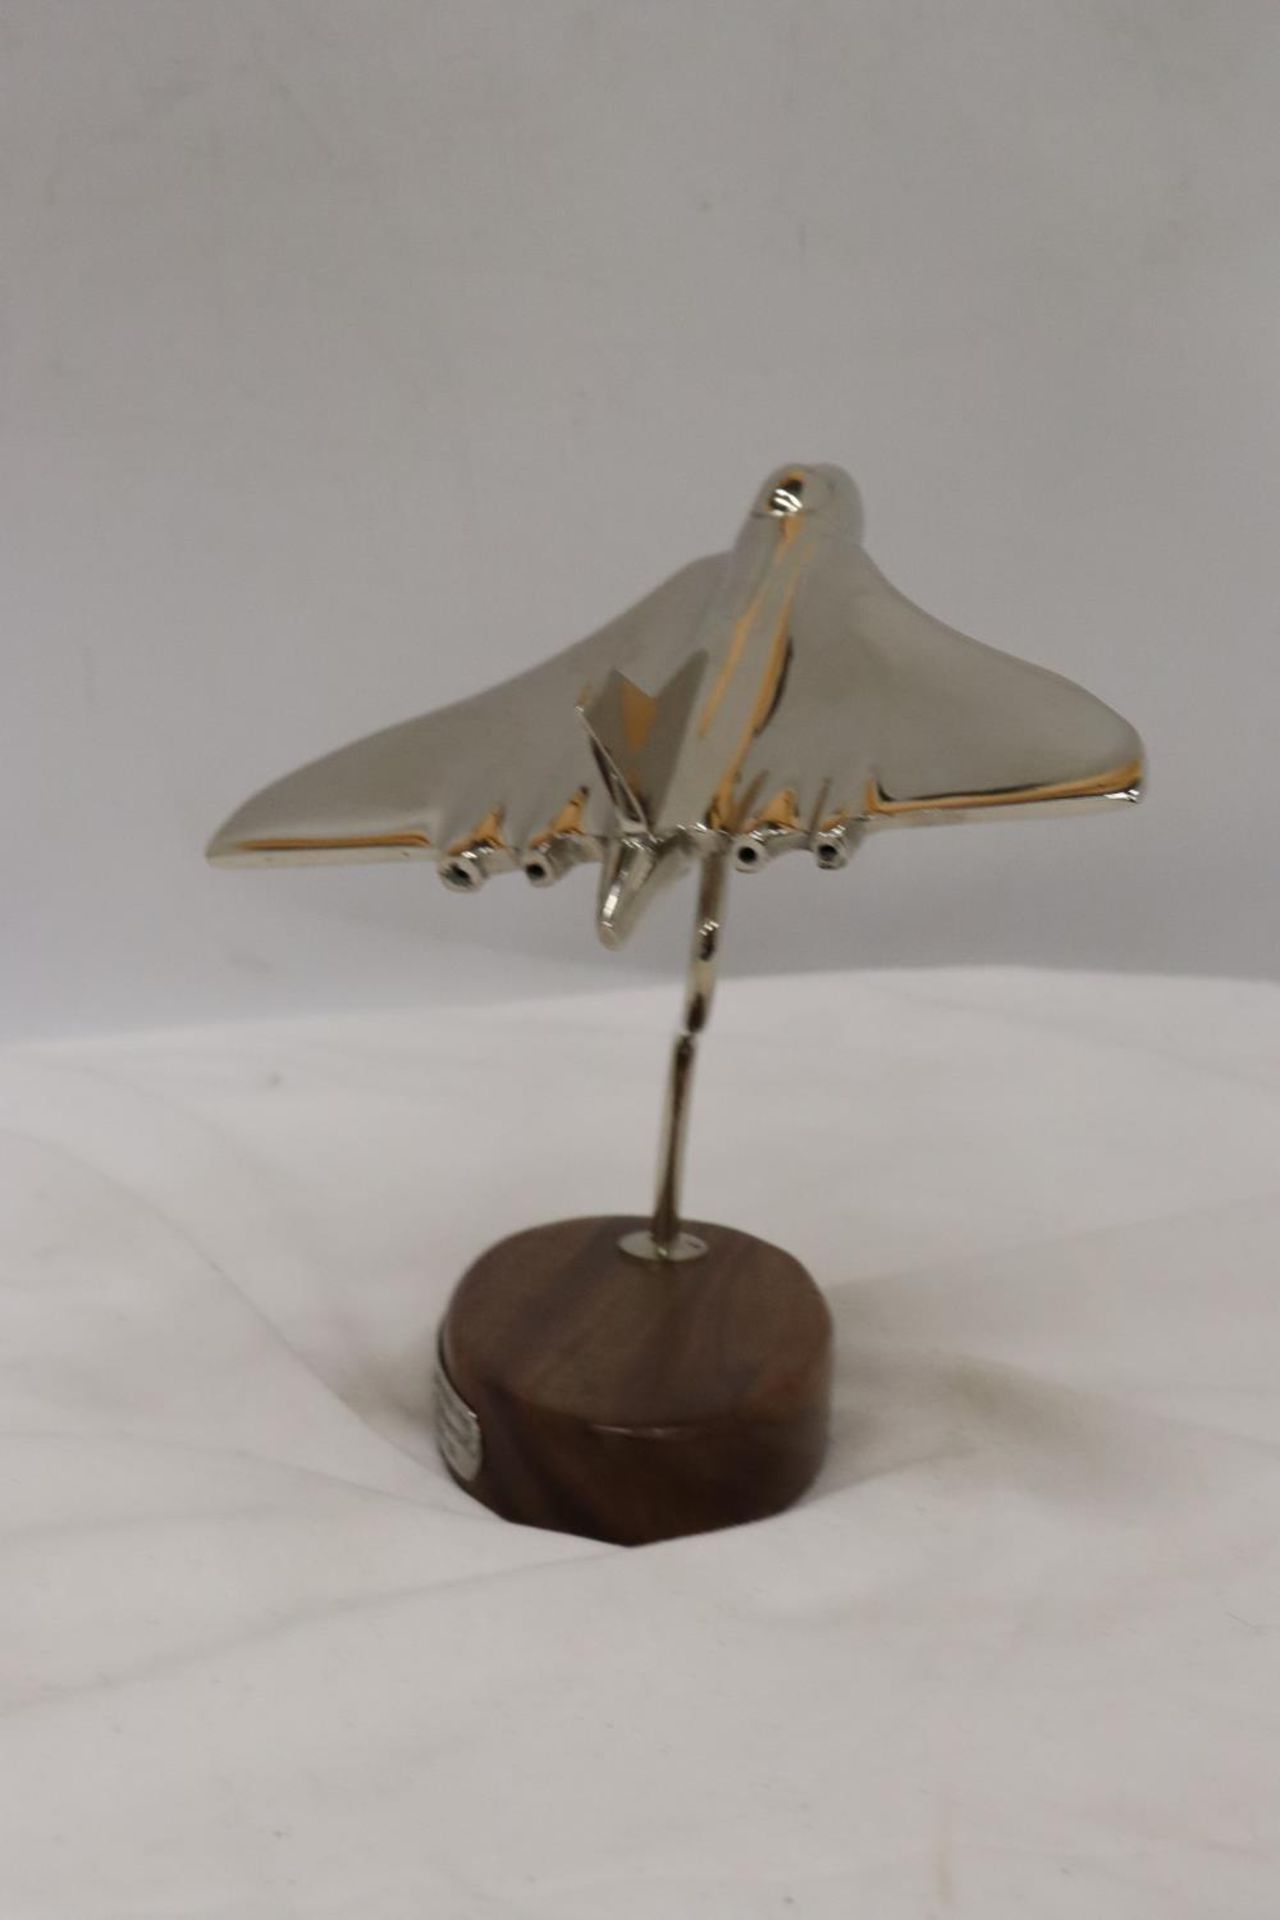 A CHROME MODEL OF AN AVRO VULCAN AEROPLANE ON A HARDWOOD BASE WITH HISTORY PLAQUE, HEIGHT 20 CM - Image 6 of 6